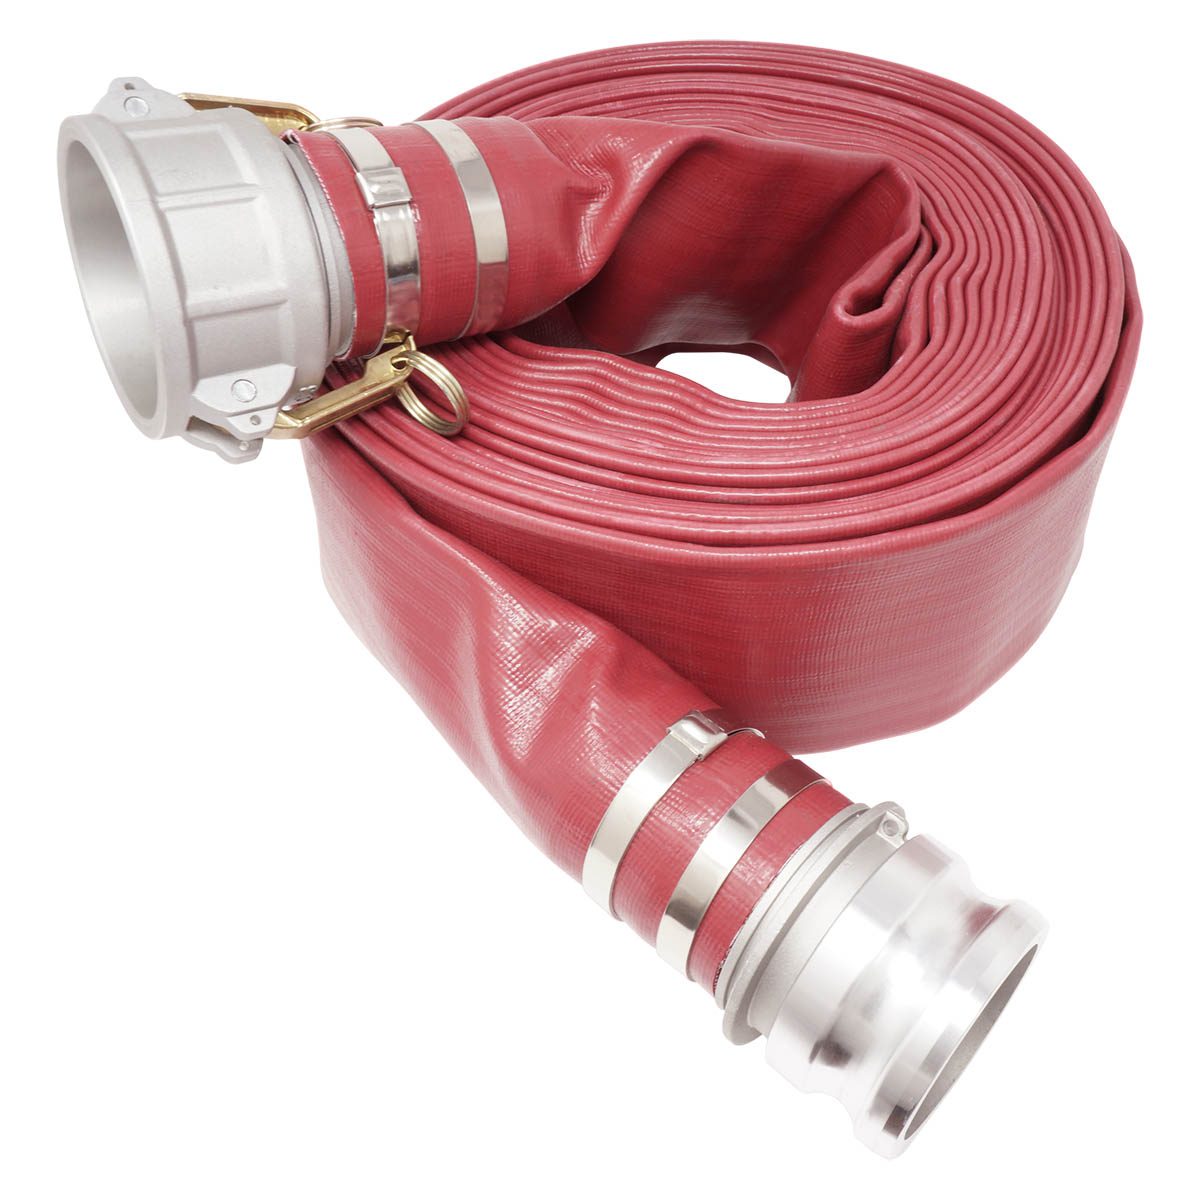 2 x 100ft PVC Lay Flat Pump Discharge Hose With Aluminum Camlock C & E  Fittings, Cam Lock Fitting Type F included, Heavy Duty Reinforced Pool